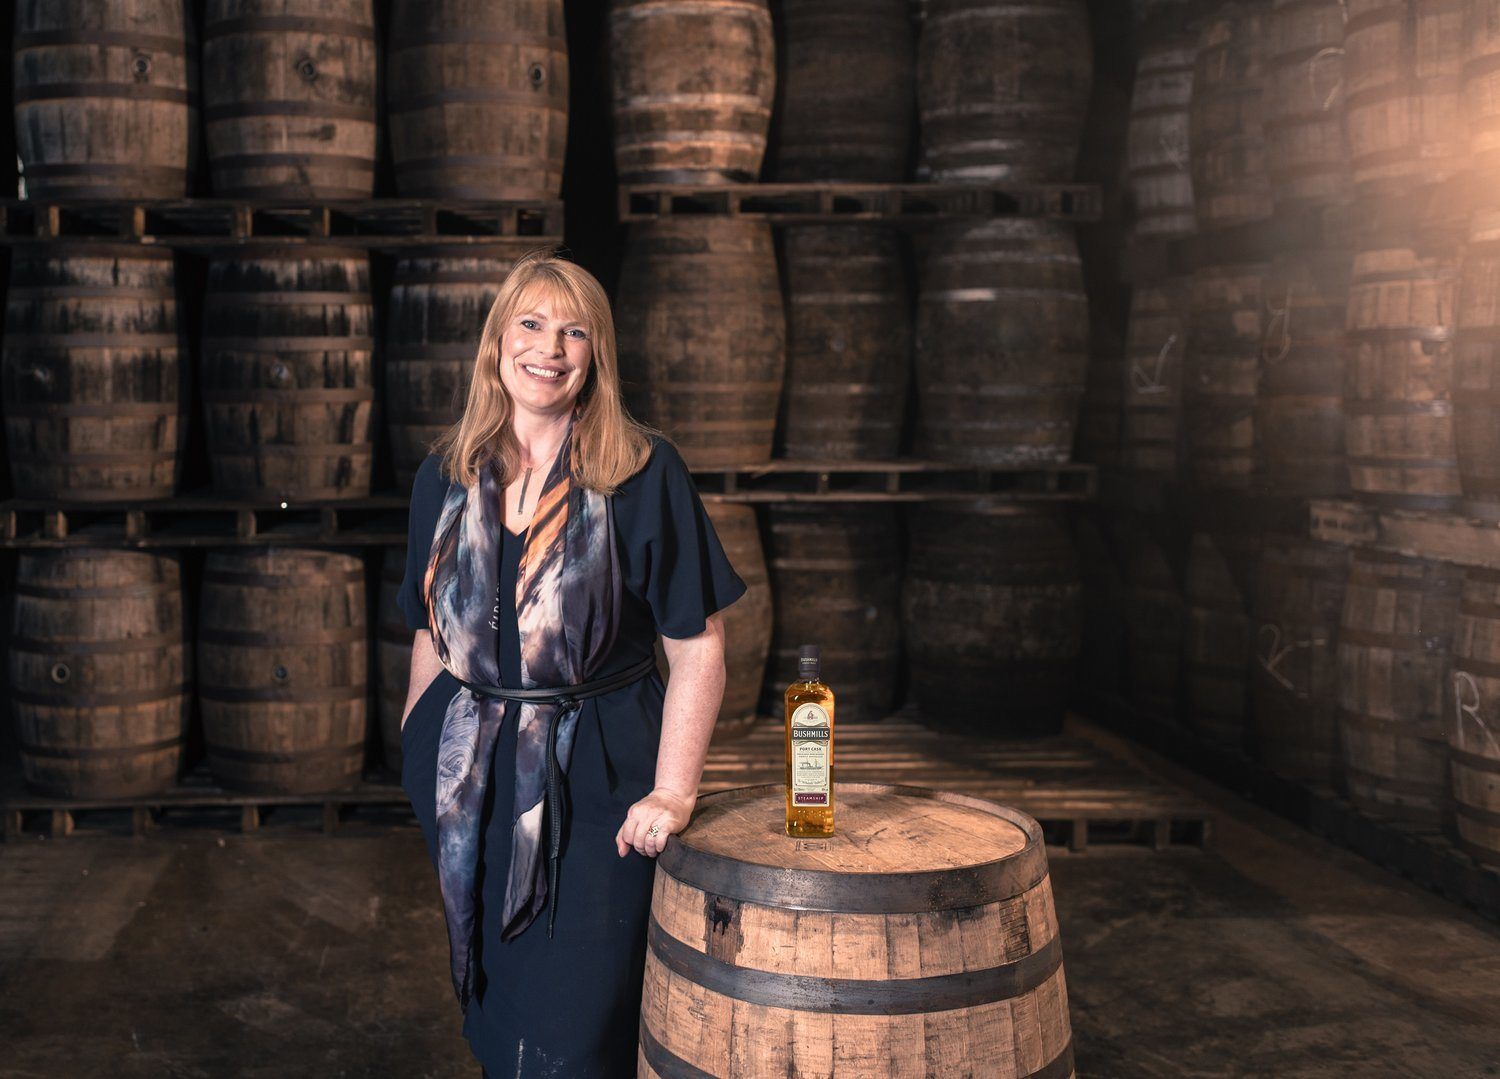 The award was presented to her at the 2019 Whisky Magazine Awards Ireland at a ceremony in Dublin.